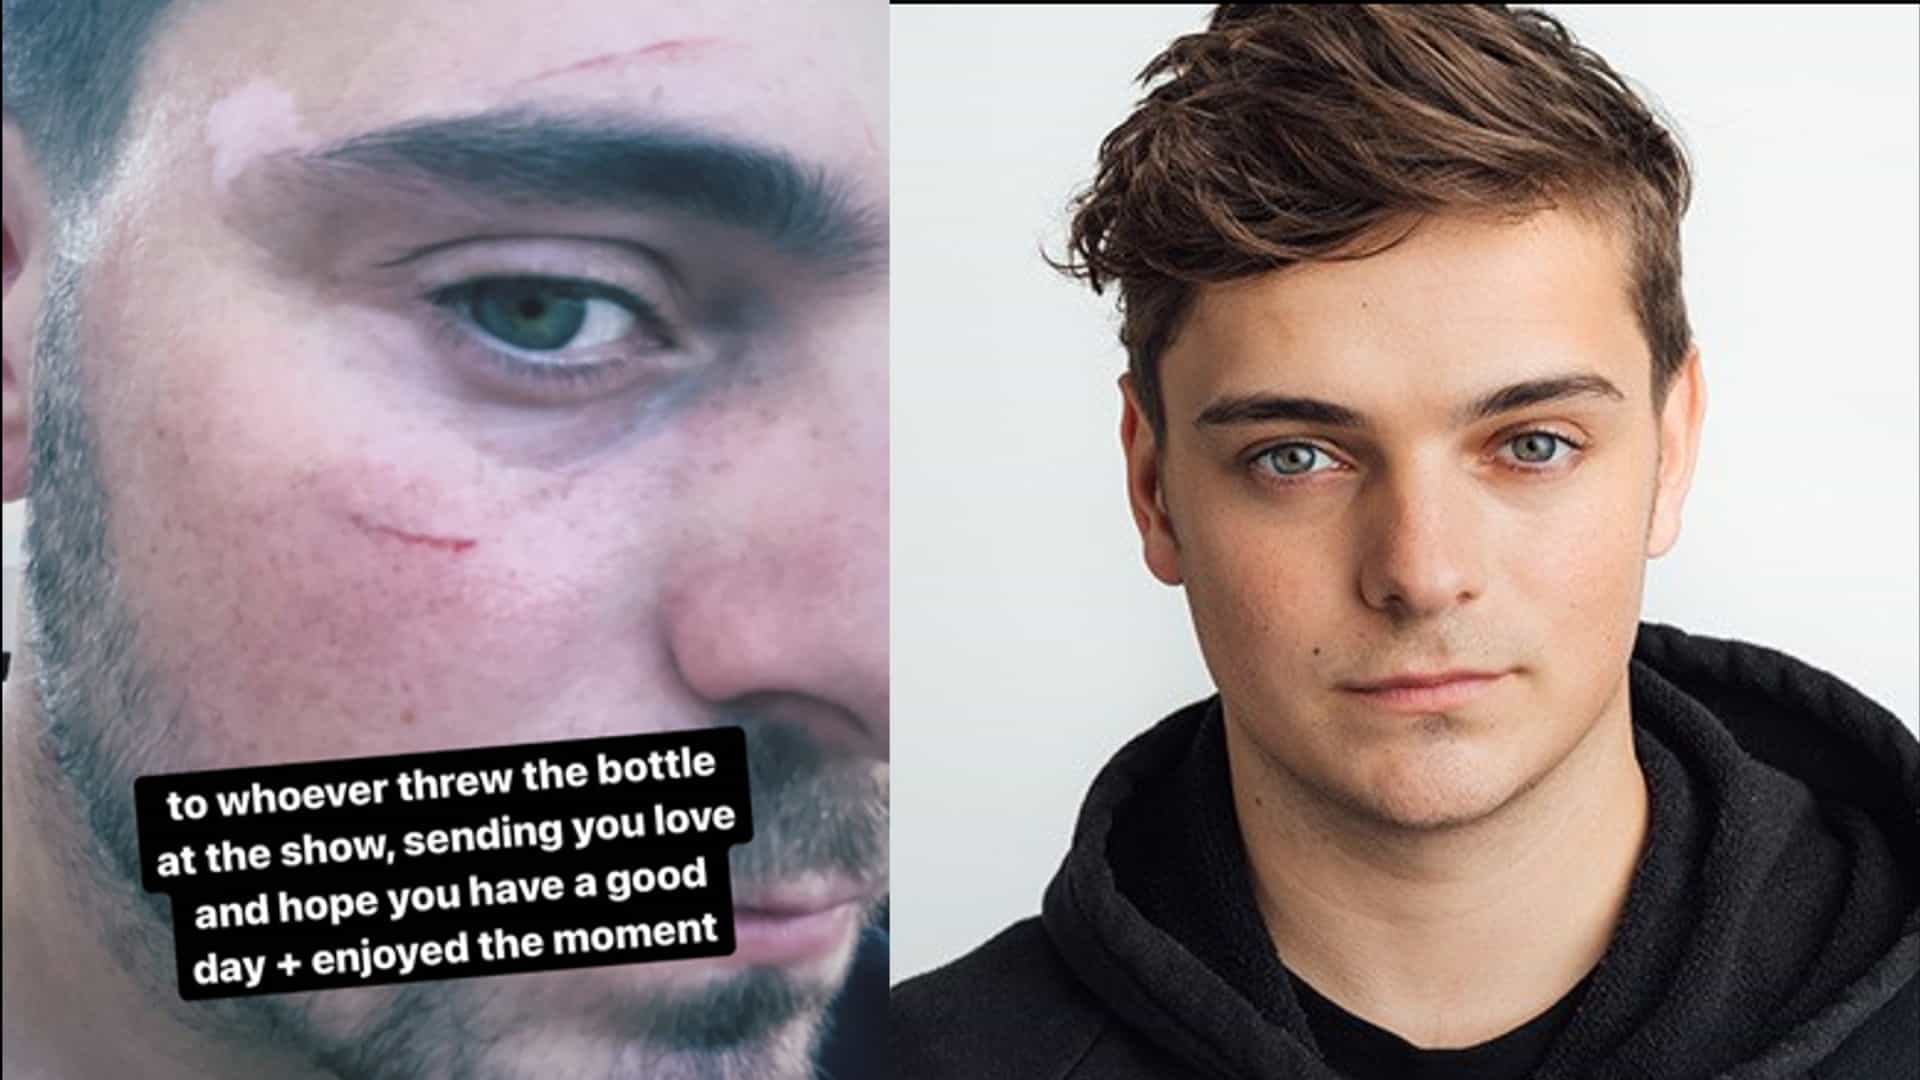 Martin Garrix gets hit by bottle at club show in Las Vegas